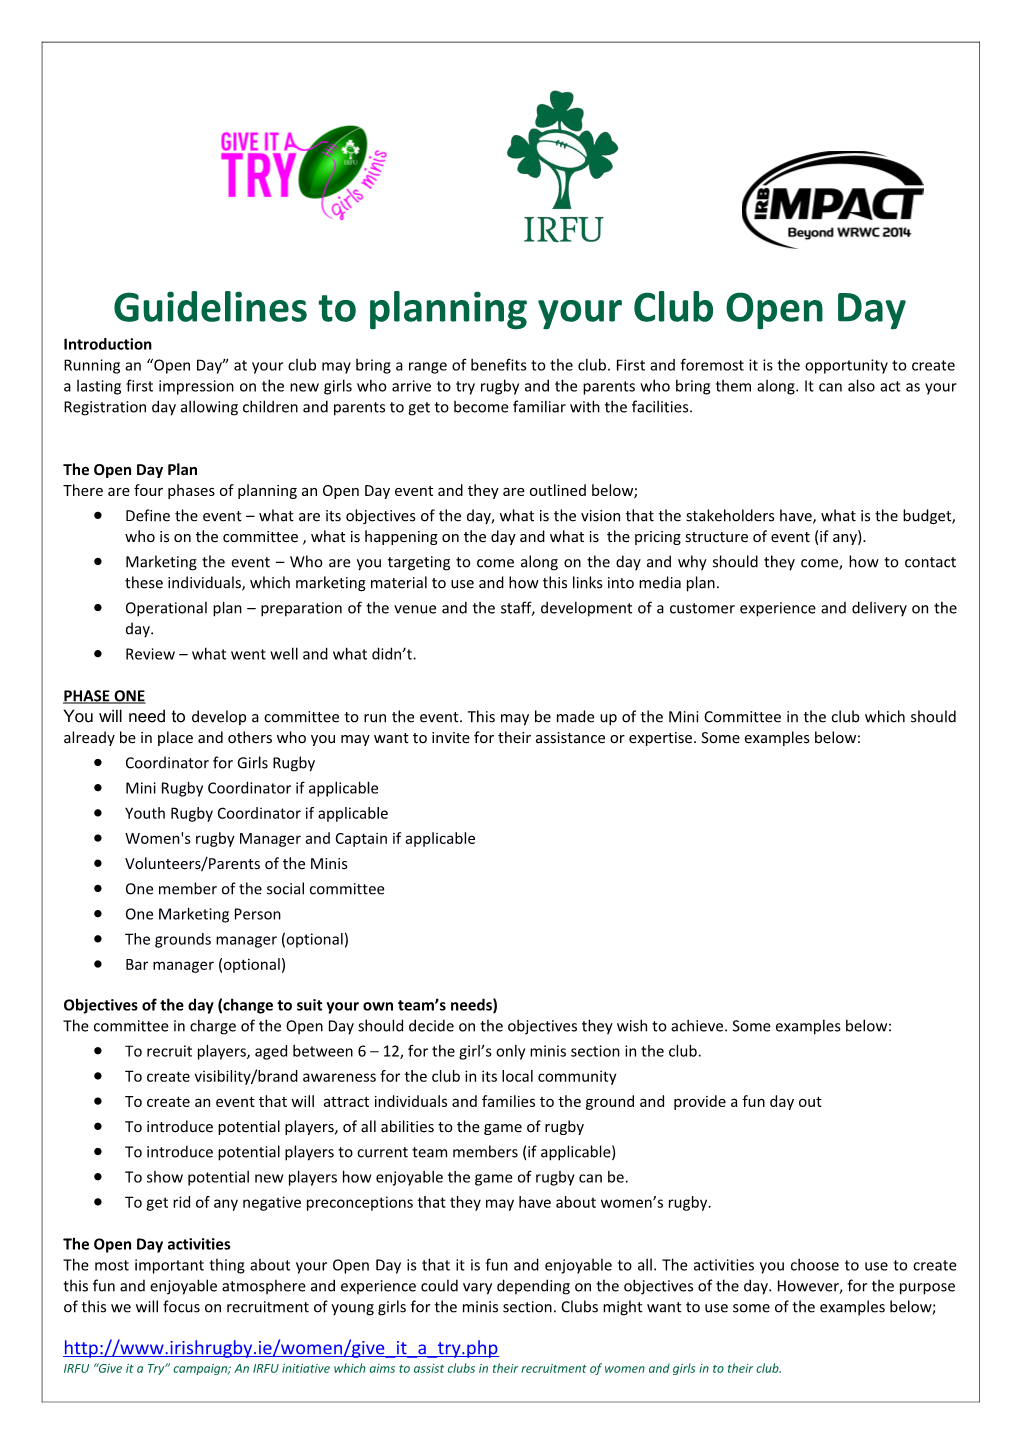 Guidelines to Planning Your Club Open Day